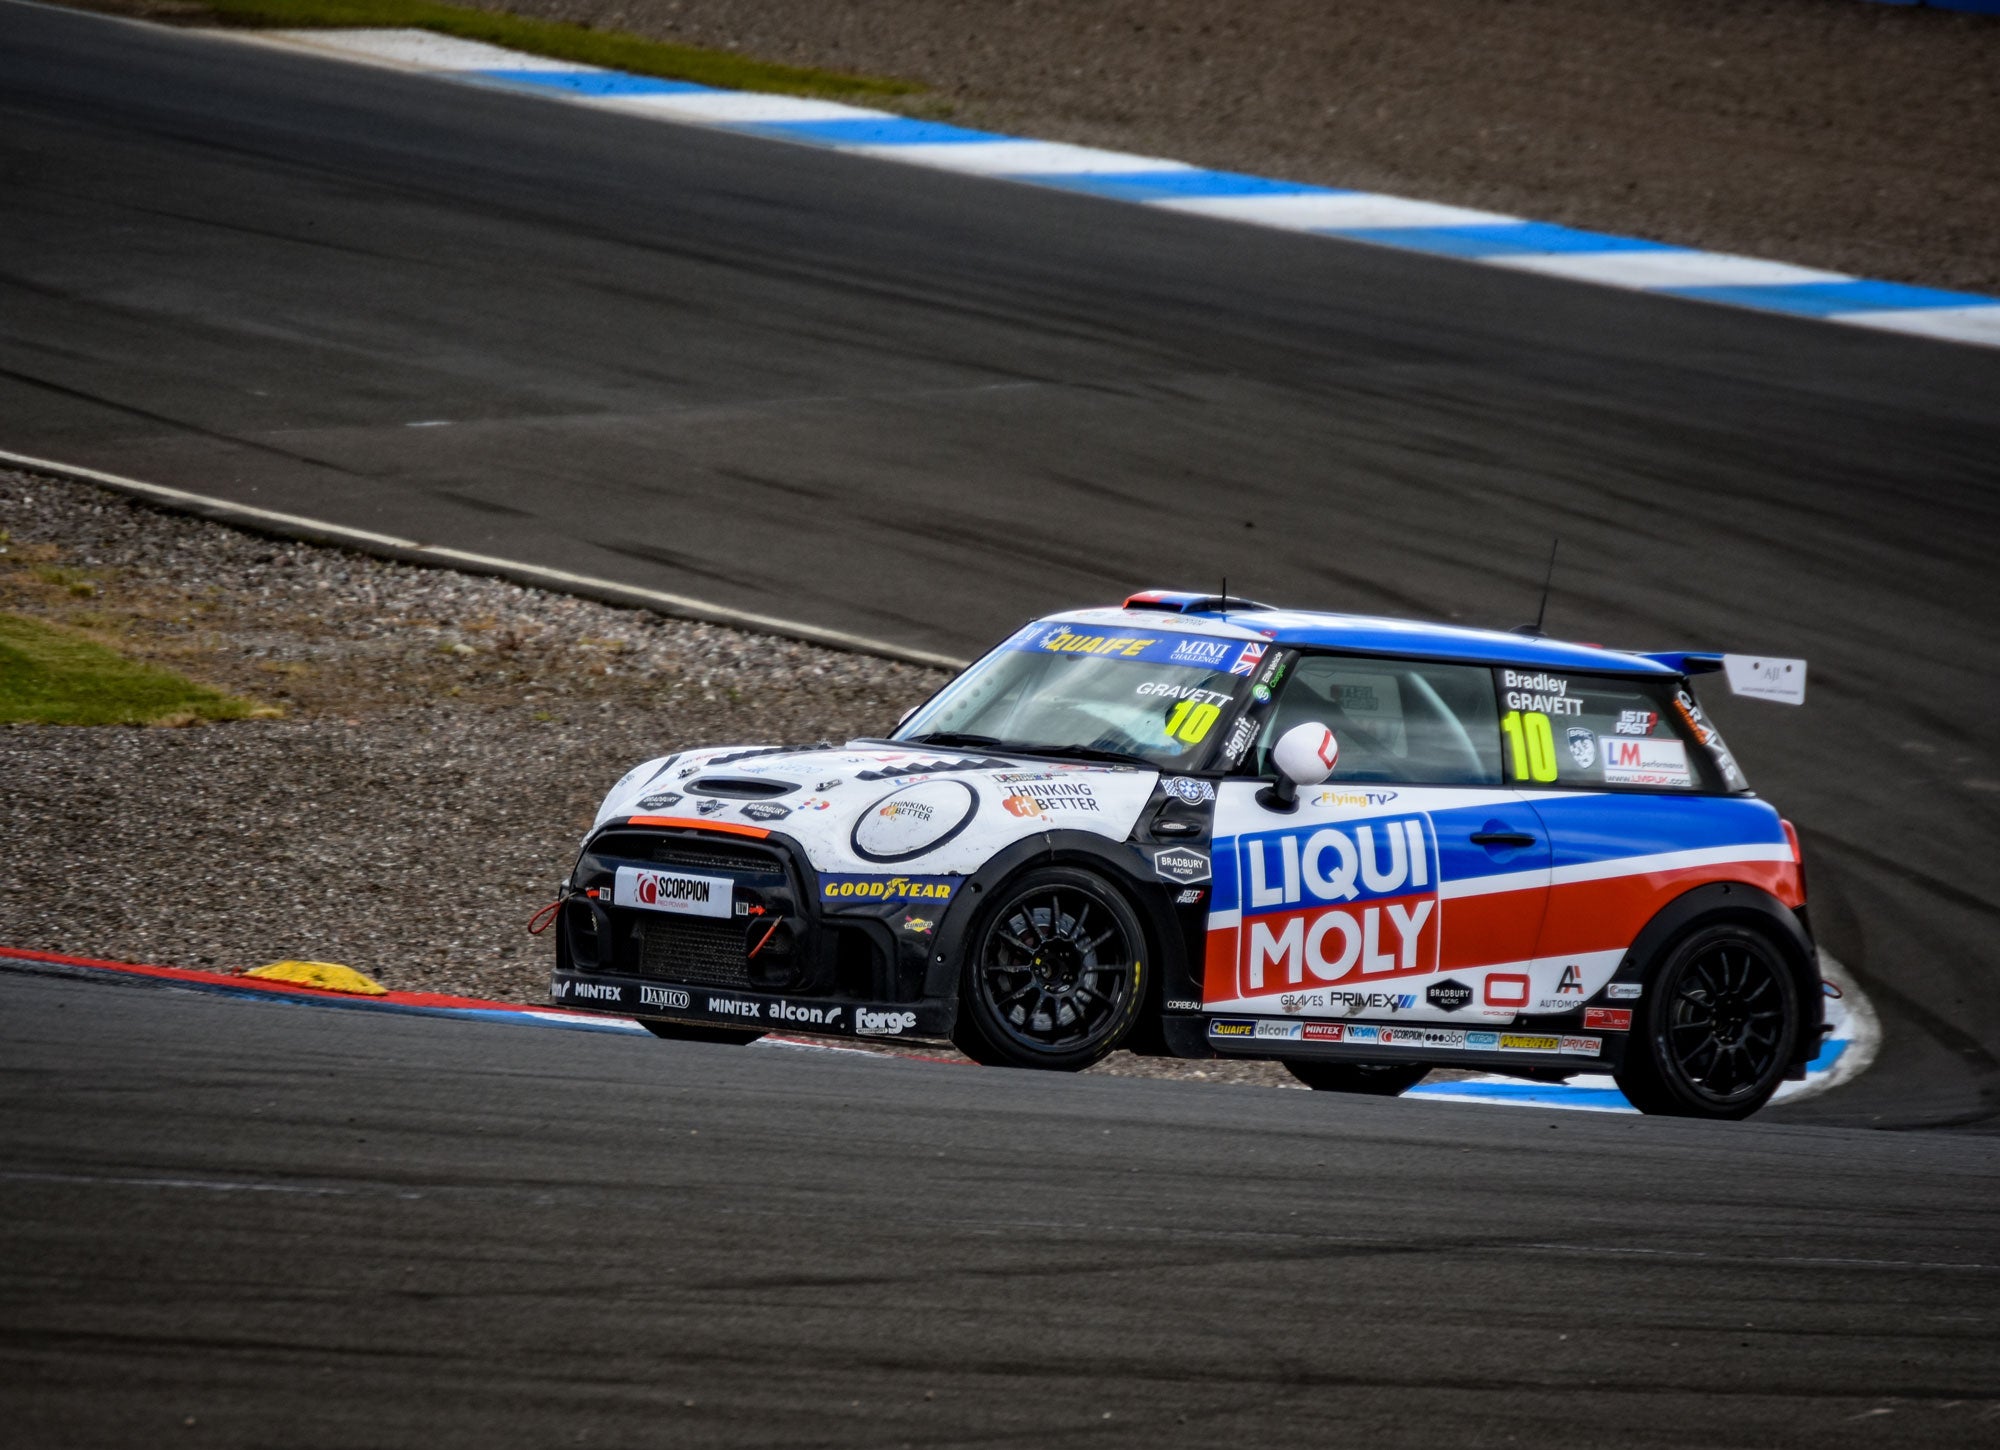 Bradley Gravett son of BTCC British Touring Car Champion Robb Gravett in the MINI Challenge JCW Series at Knockhill in 2022 Exiting Taylors Final Corner Hairpin Graves Motorsport Cooper Racing Driver LIQUI MOLY LM Performance Thinking it Better